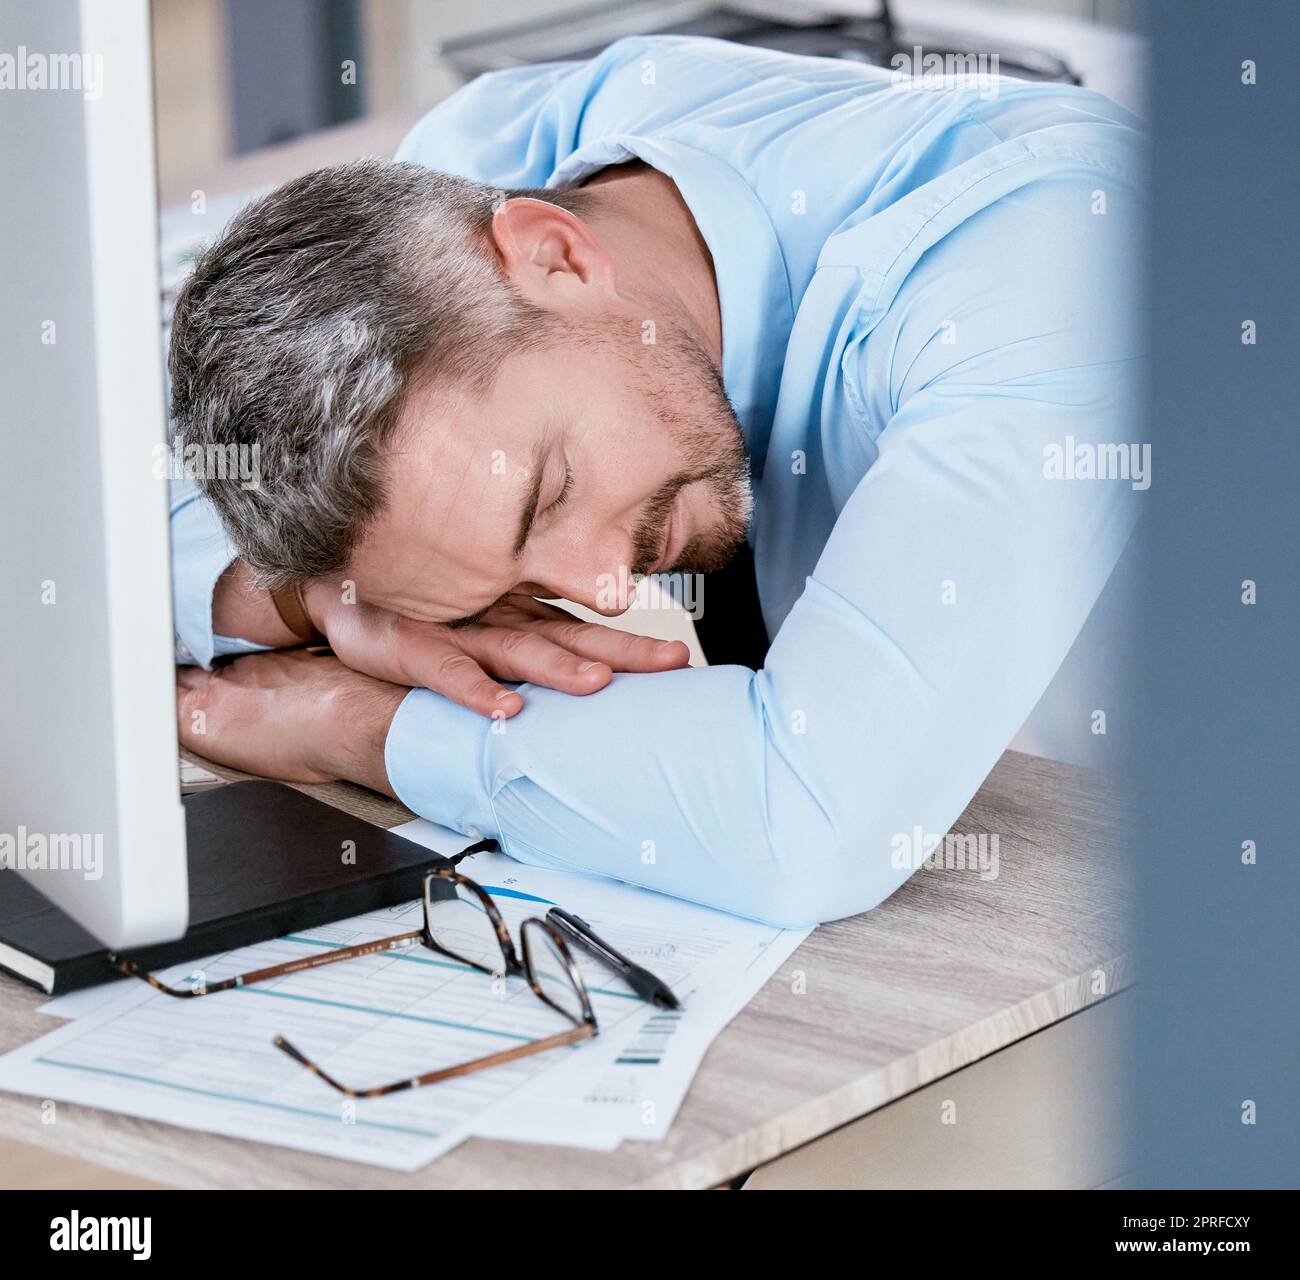 Hard work is too tiring. a mature businessman sleeping at his desk in an office Stock Photo